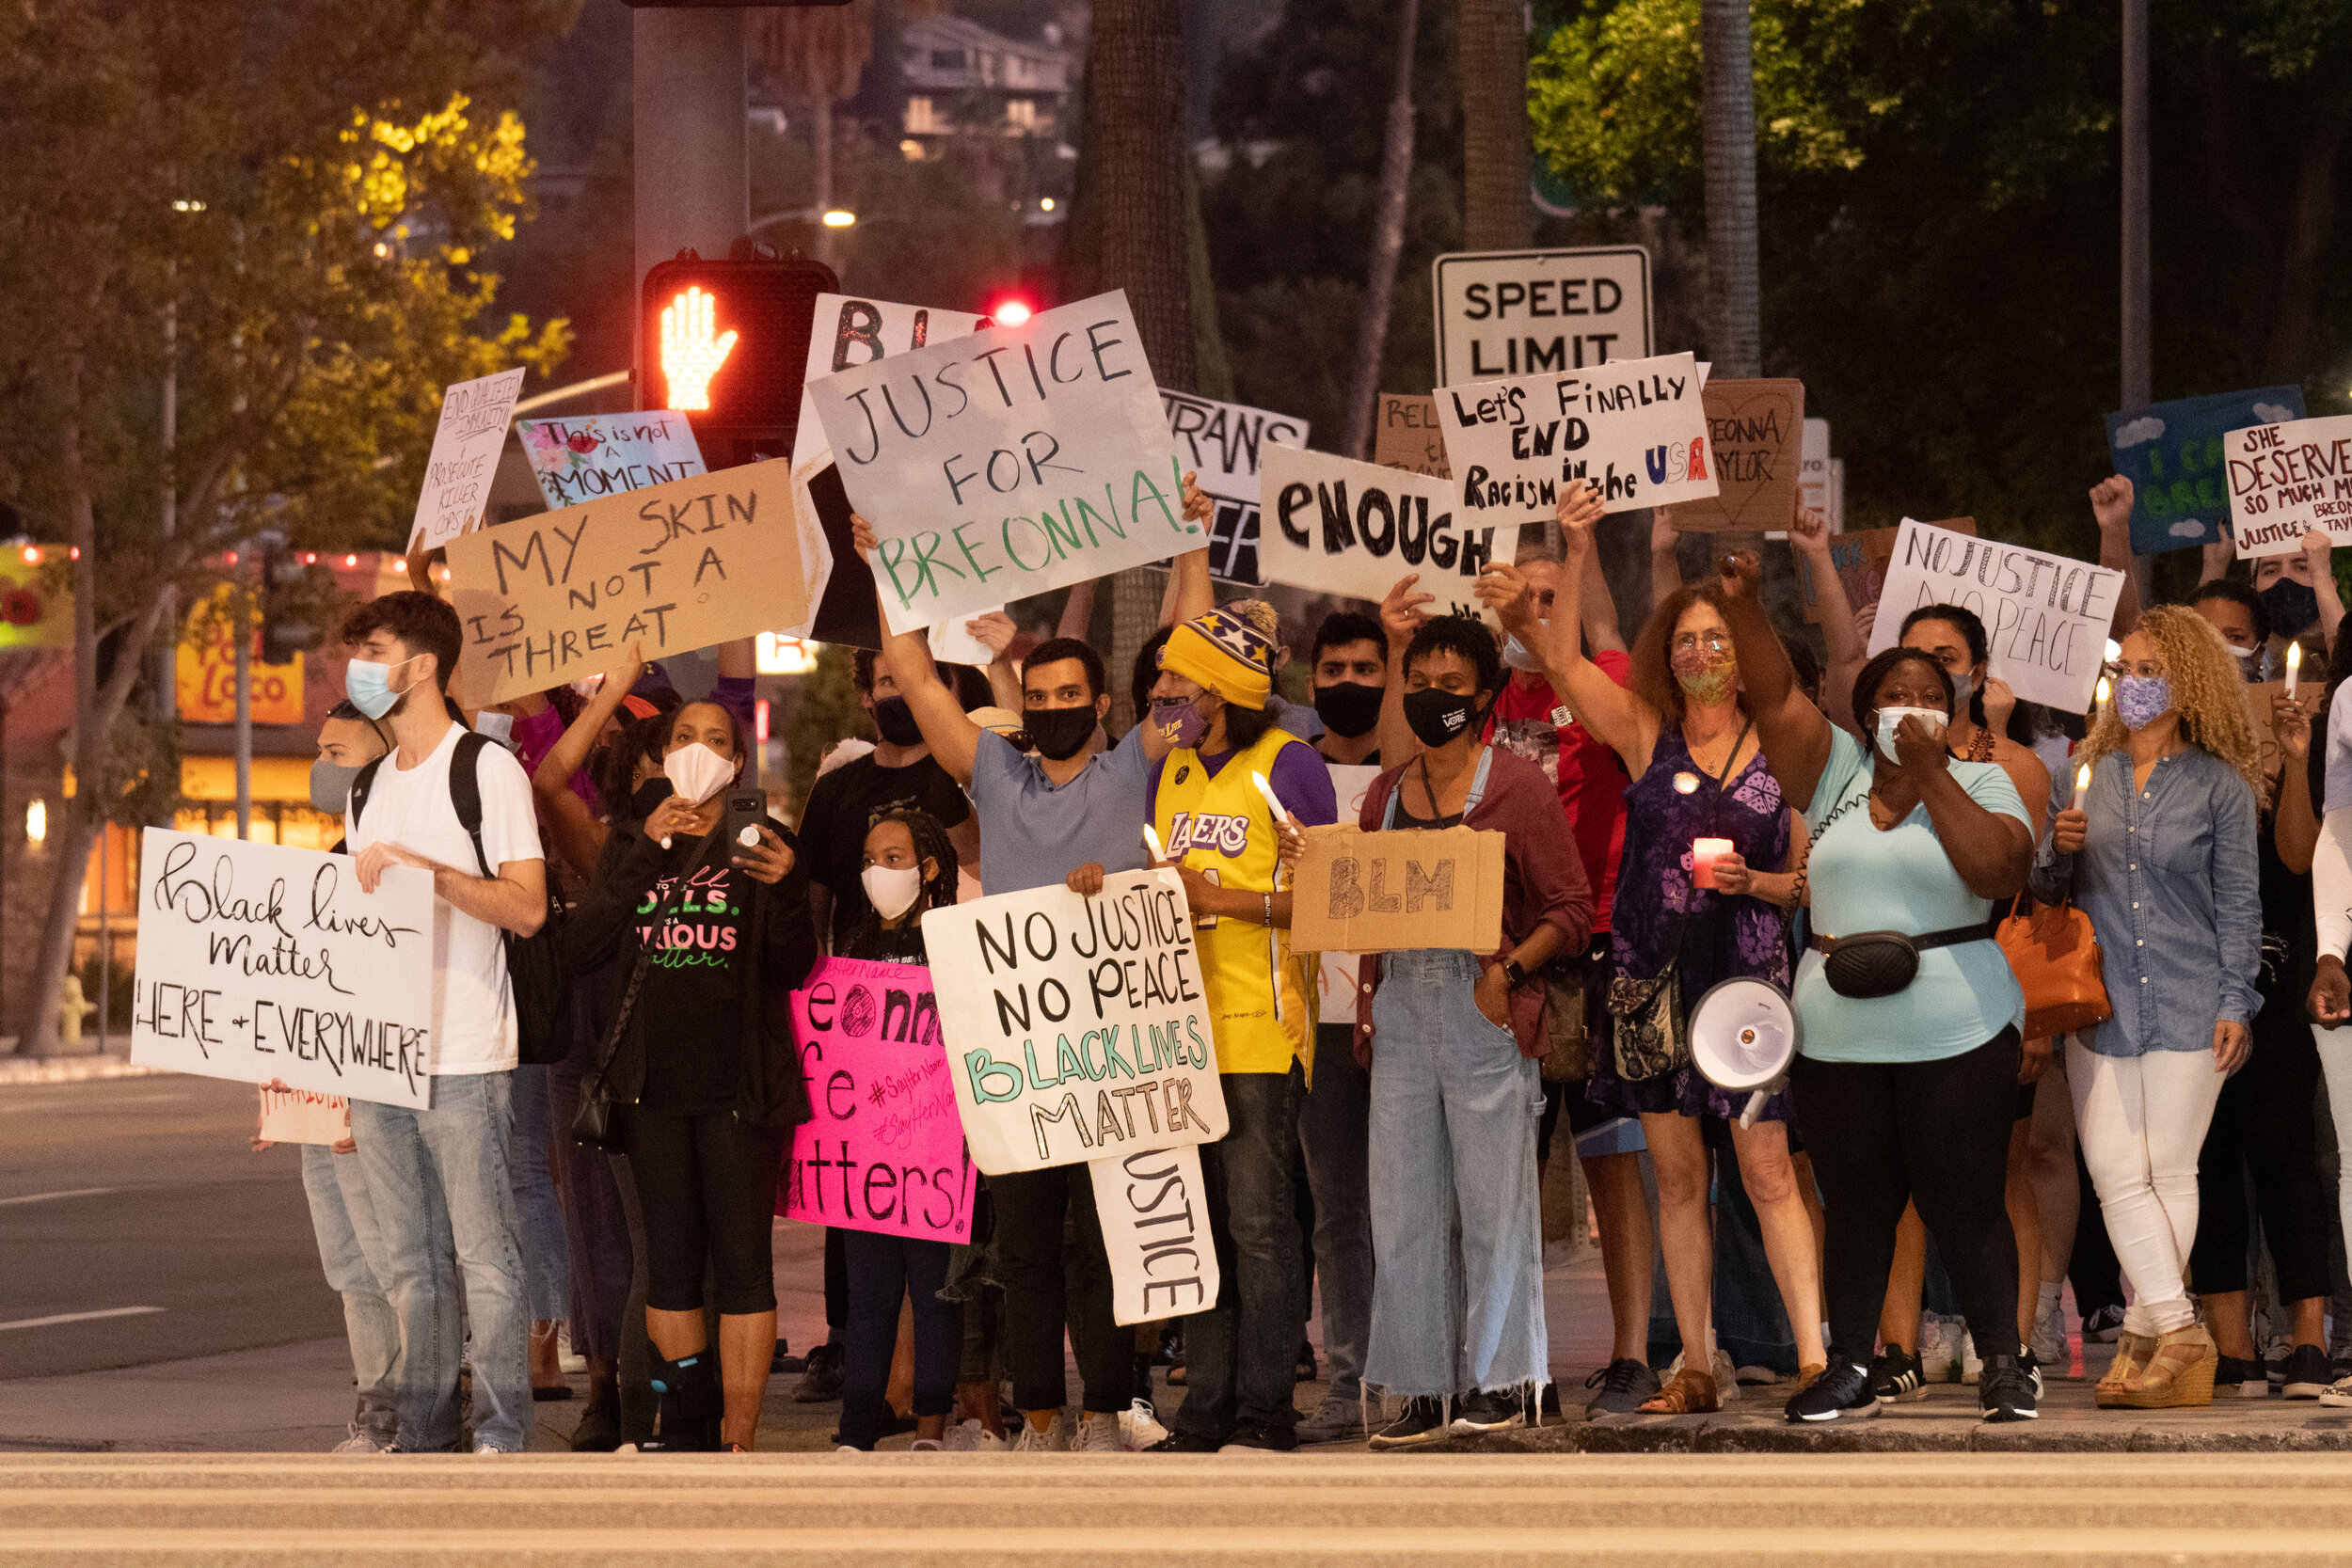   Protesters with The Valley of Change stand on the corner of Sepulveda Blvd and Ventura Blvd in Sherman Oaks, Calif. on Sept. 26, 2020. (Michael Goldsmith / The Corsair)  